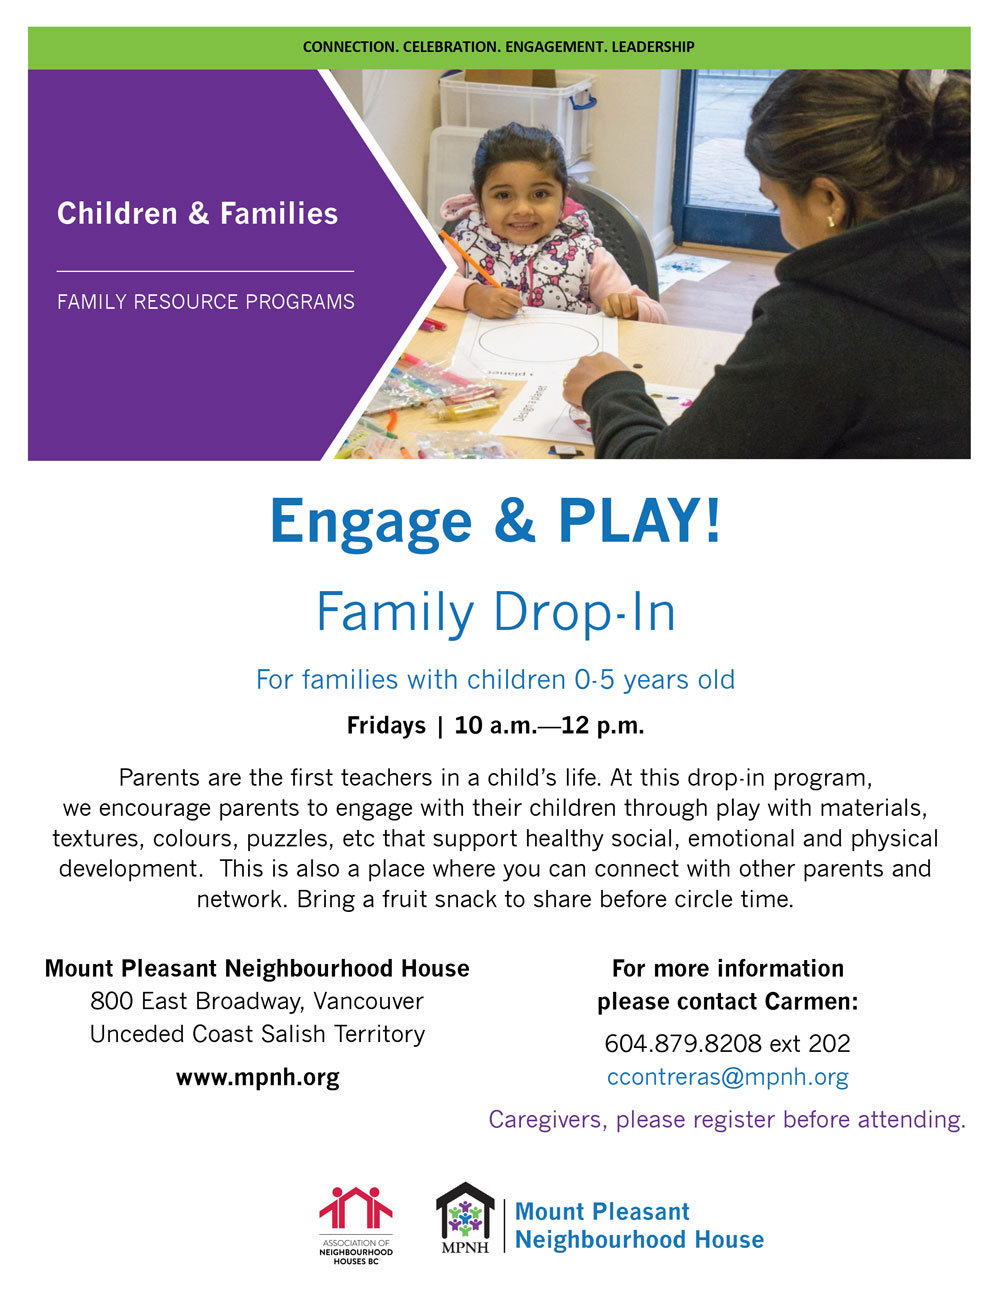 An image of the poster with event details, featuring a photo of a caregiver and child doing a craft together.